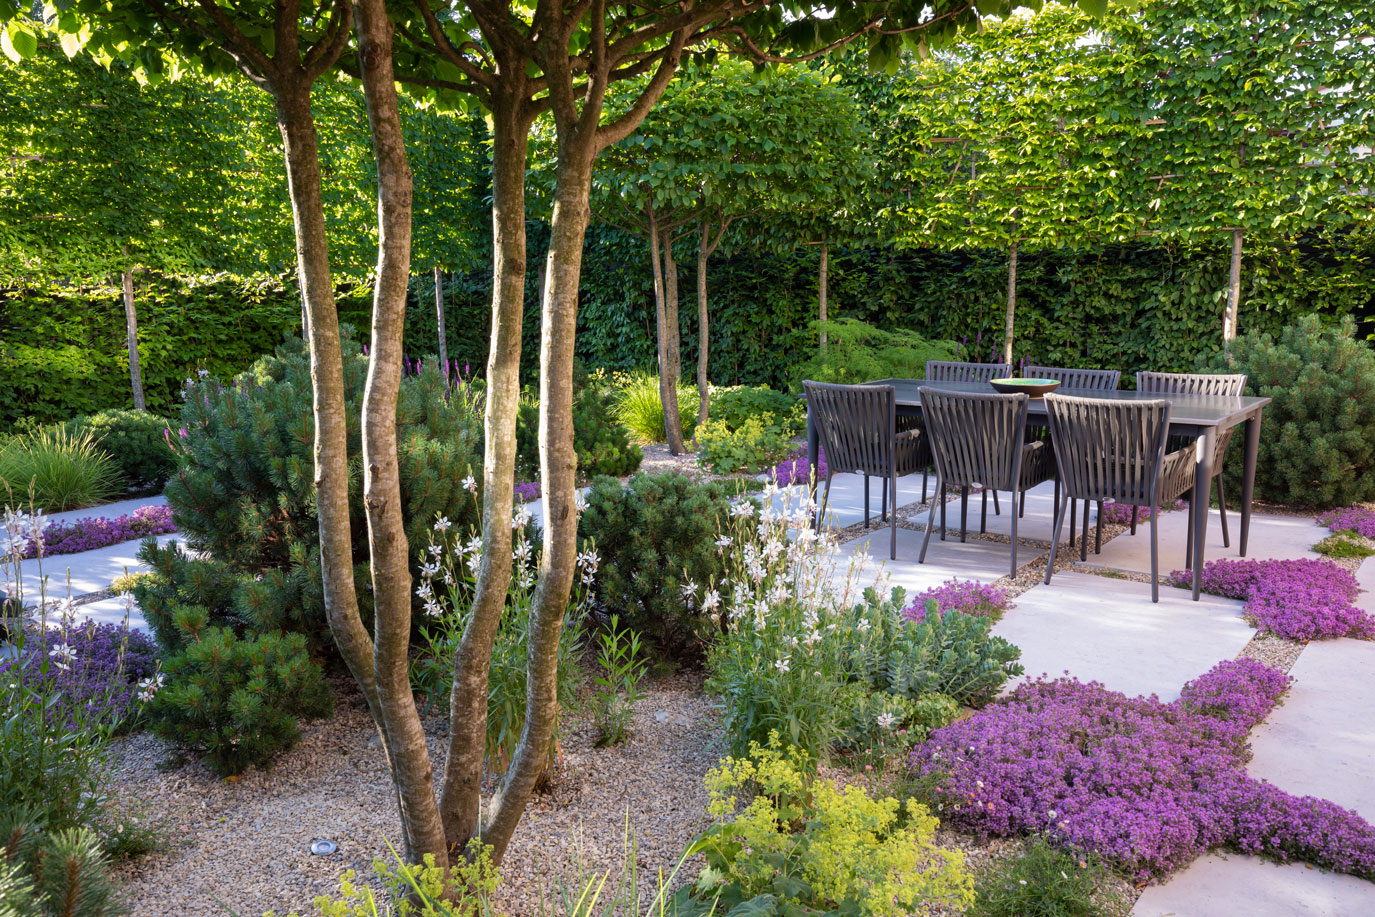 Colm Joseph Suffolk garden designer multi-stem tree pleached hornbeam trees seating area outdoor dining natural planting bespoke large format limestone paving planted paving joints creeping thyme